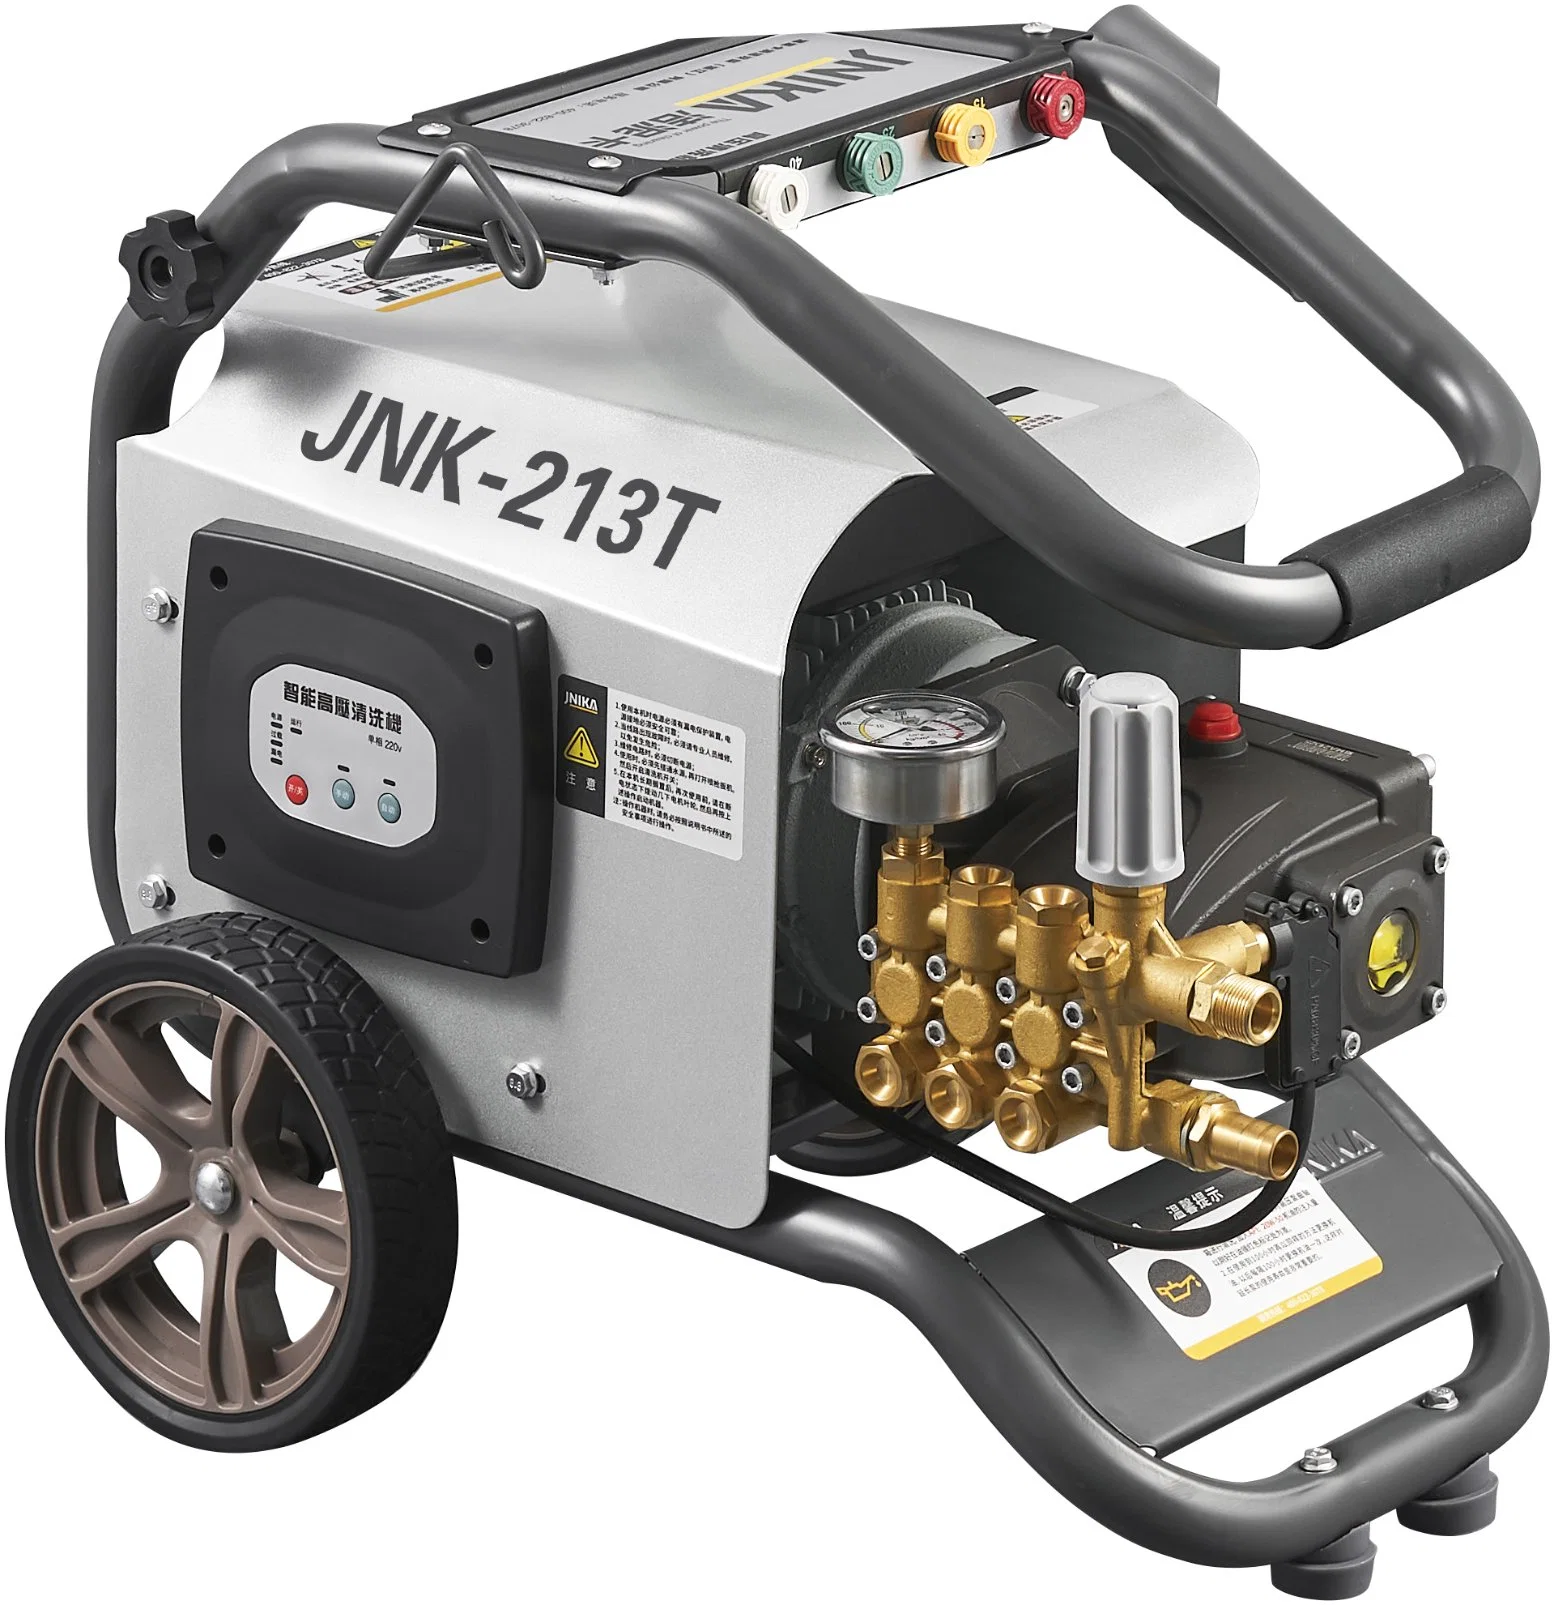 Jnika Professional High Pressure Cleaner Industrial High Pressure Washer Commercial Cleaning Tool